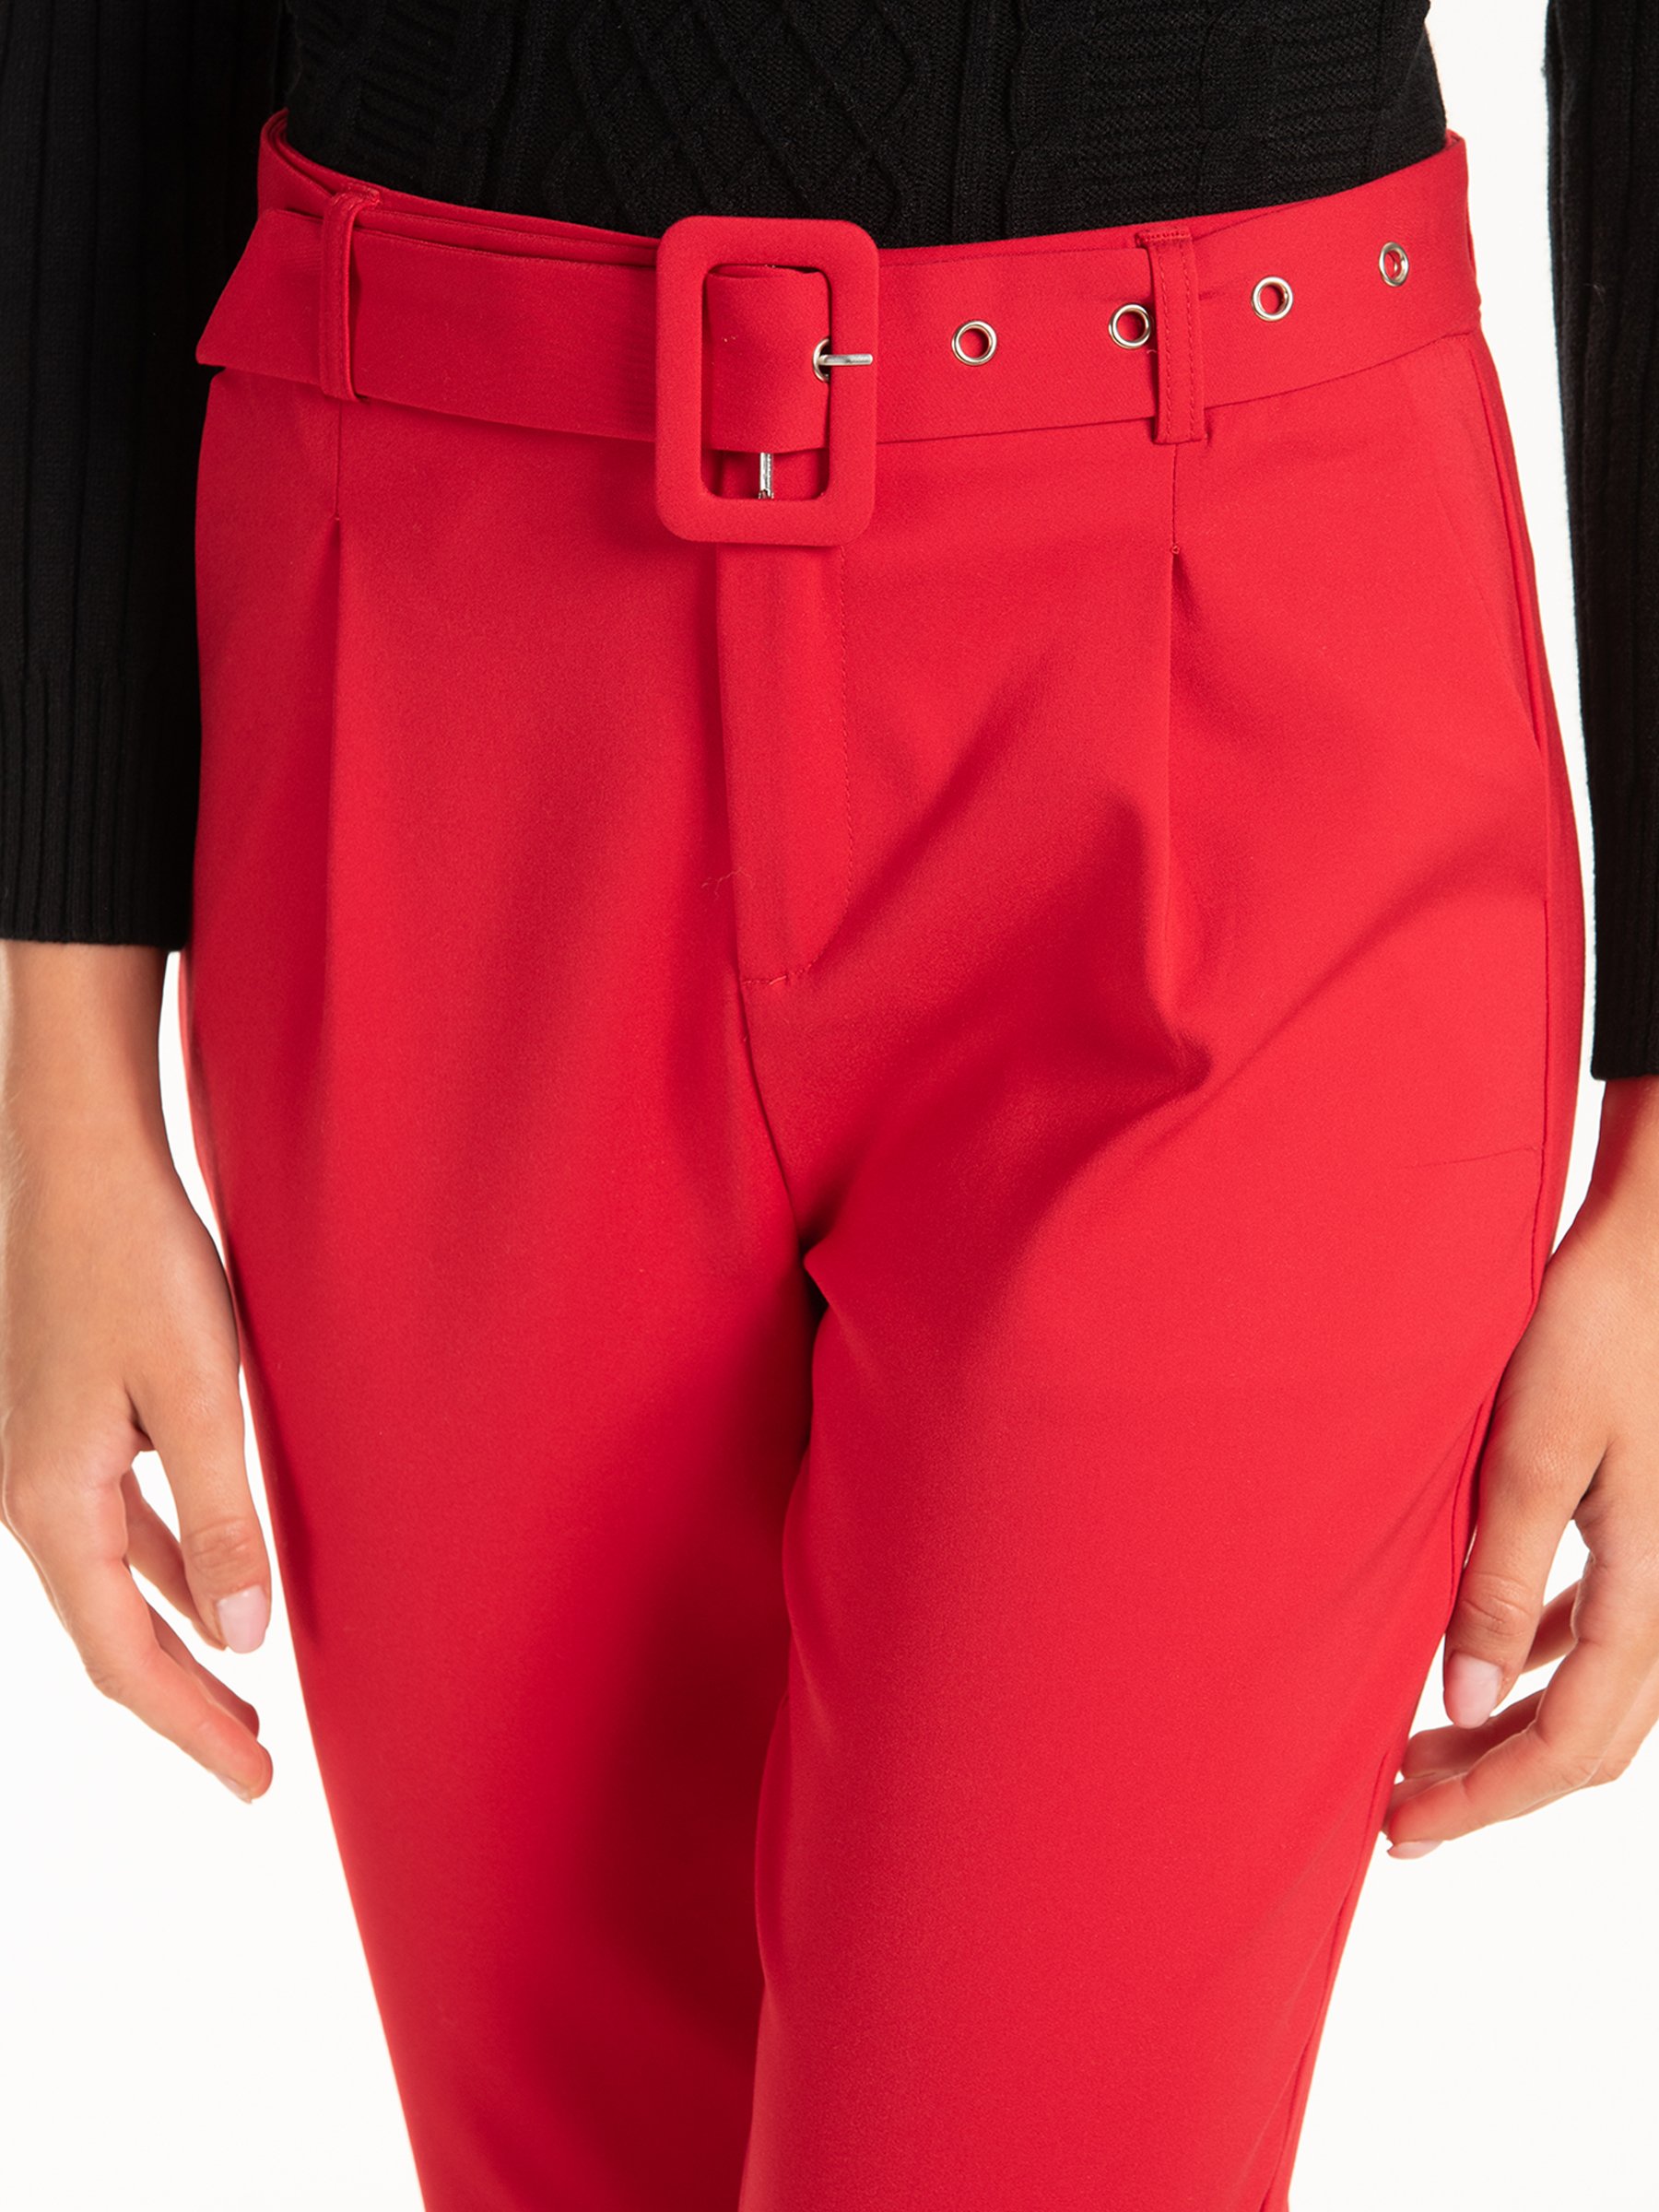 Cozyease Women's High Waisted Carrot Pants